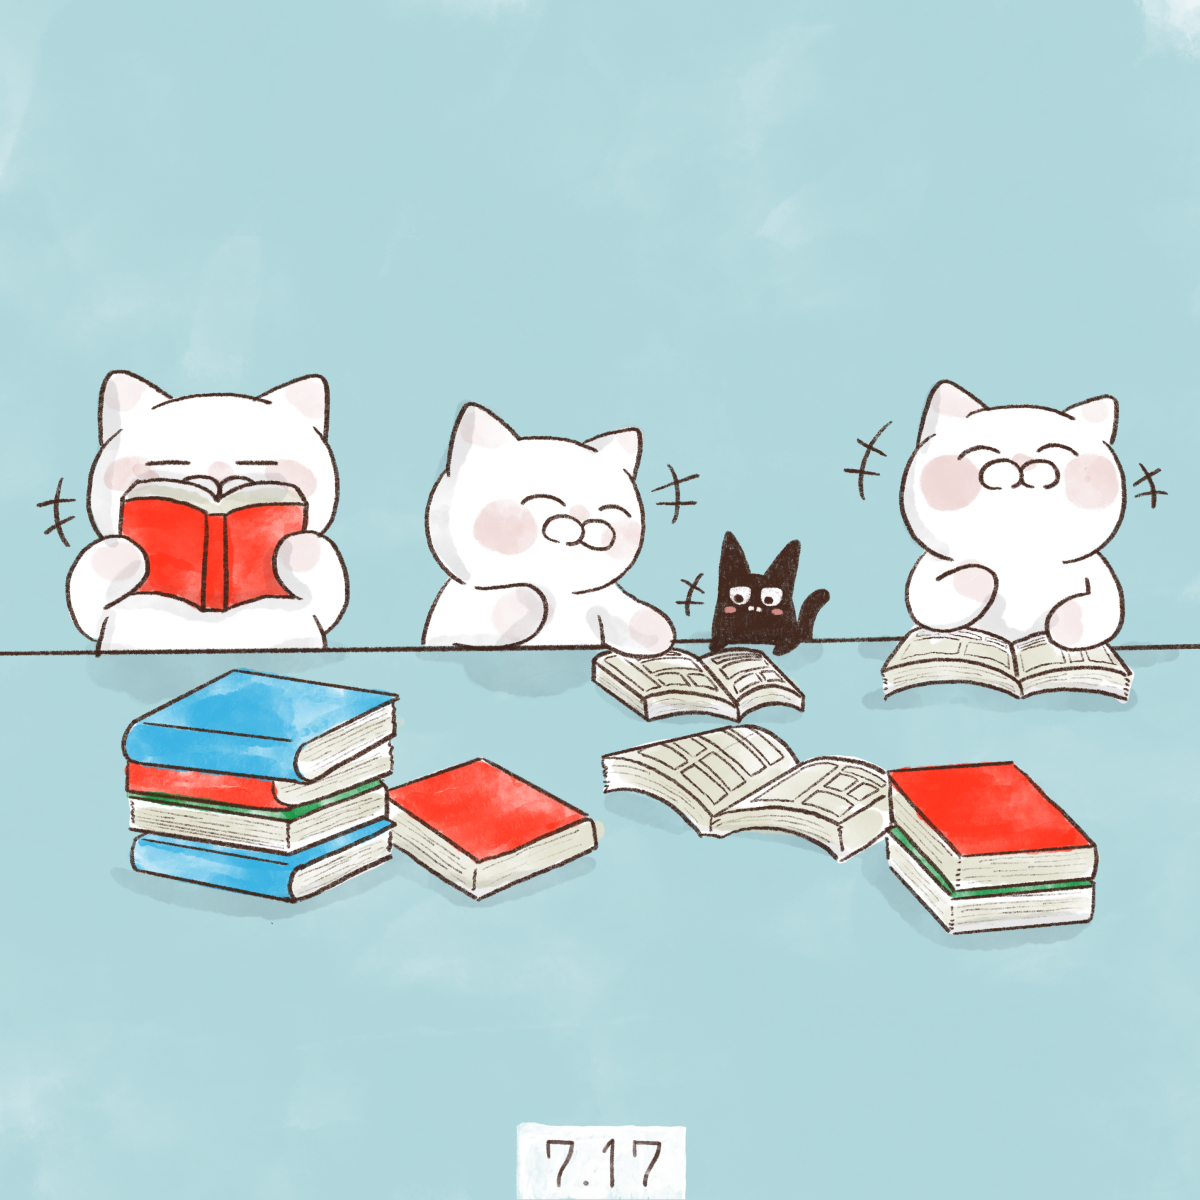 cat book no humans white cat book stack black cat holding book  illustration images